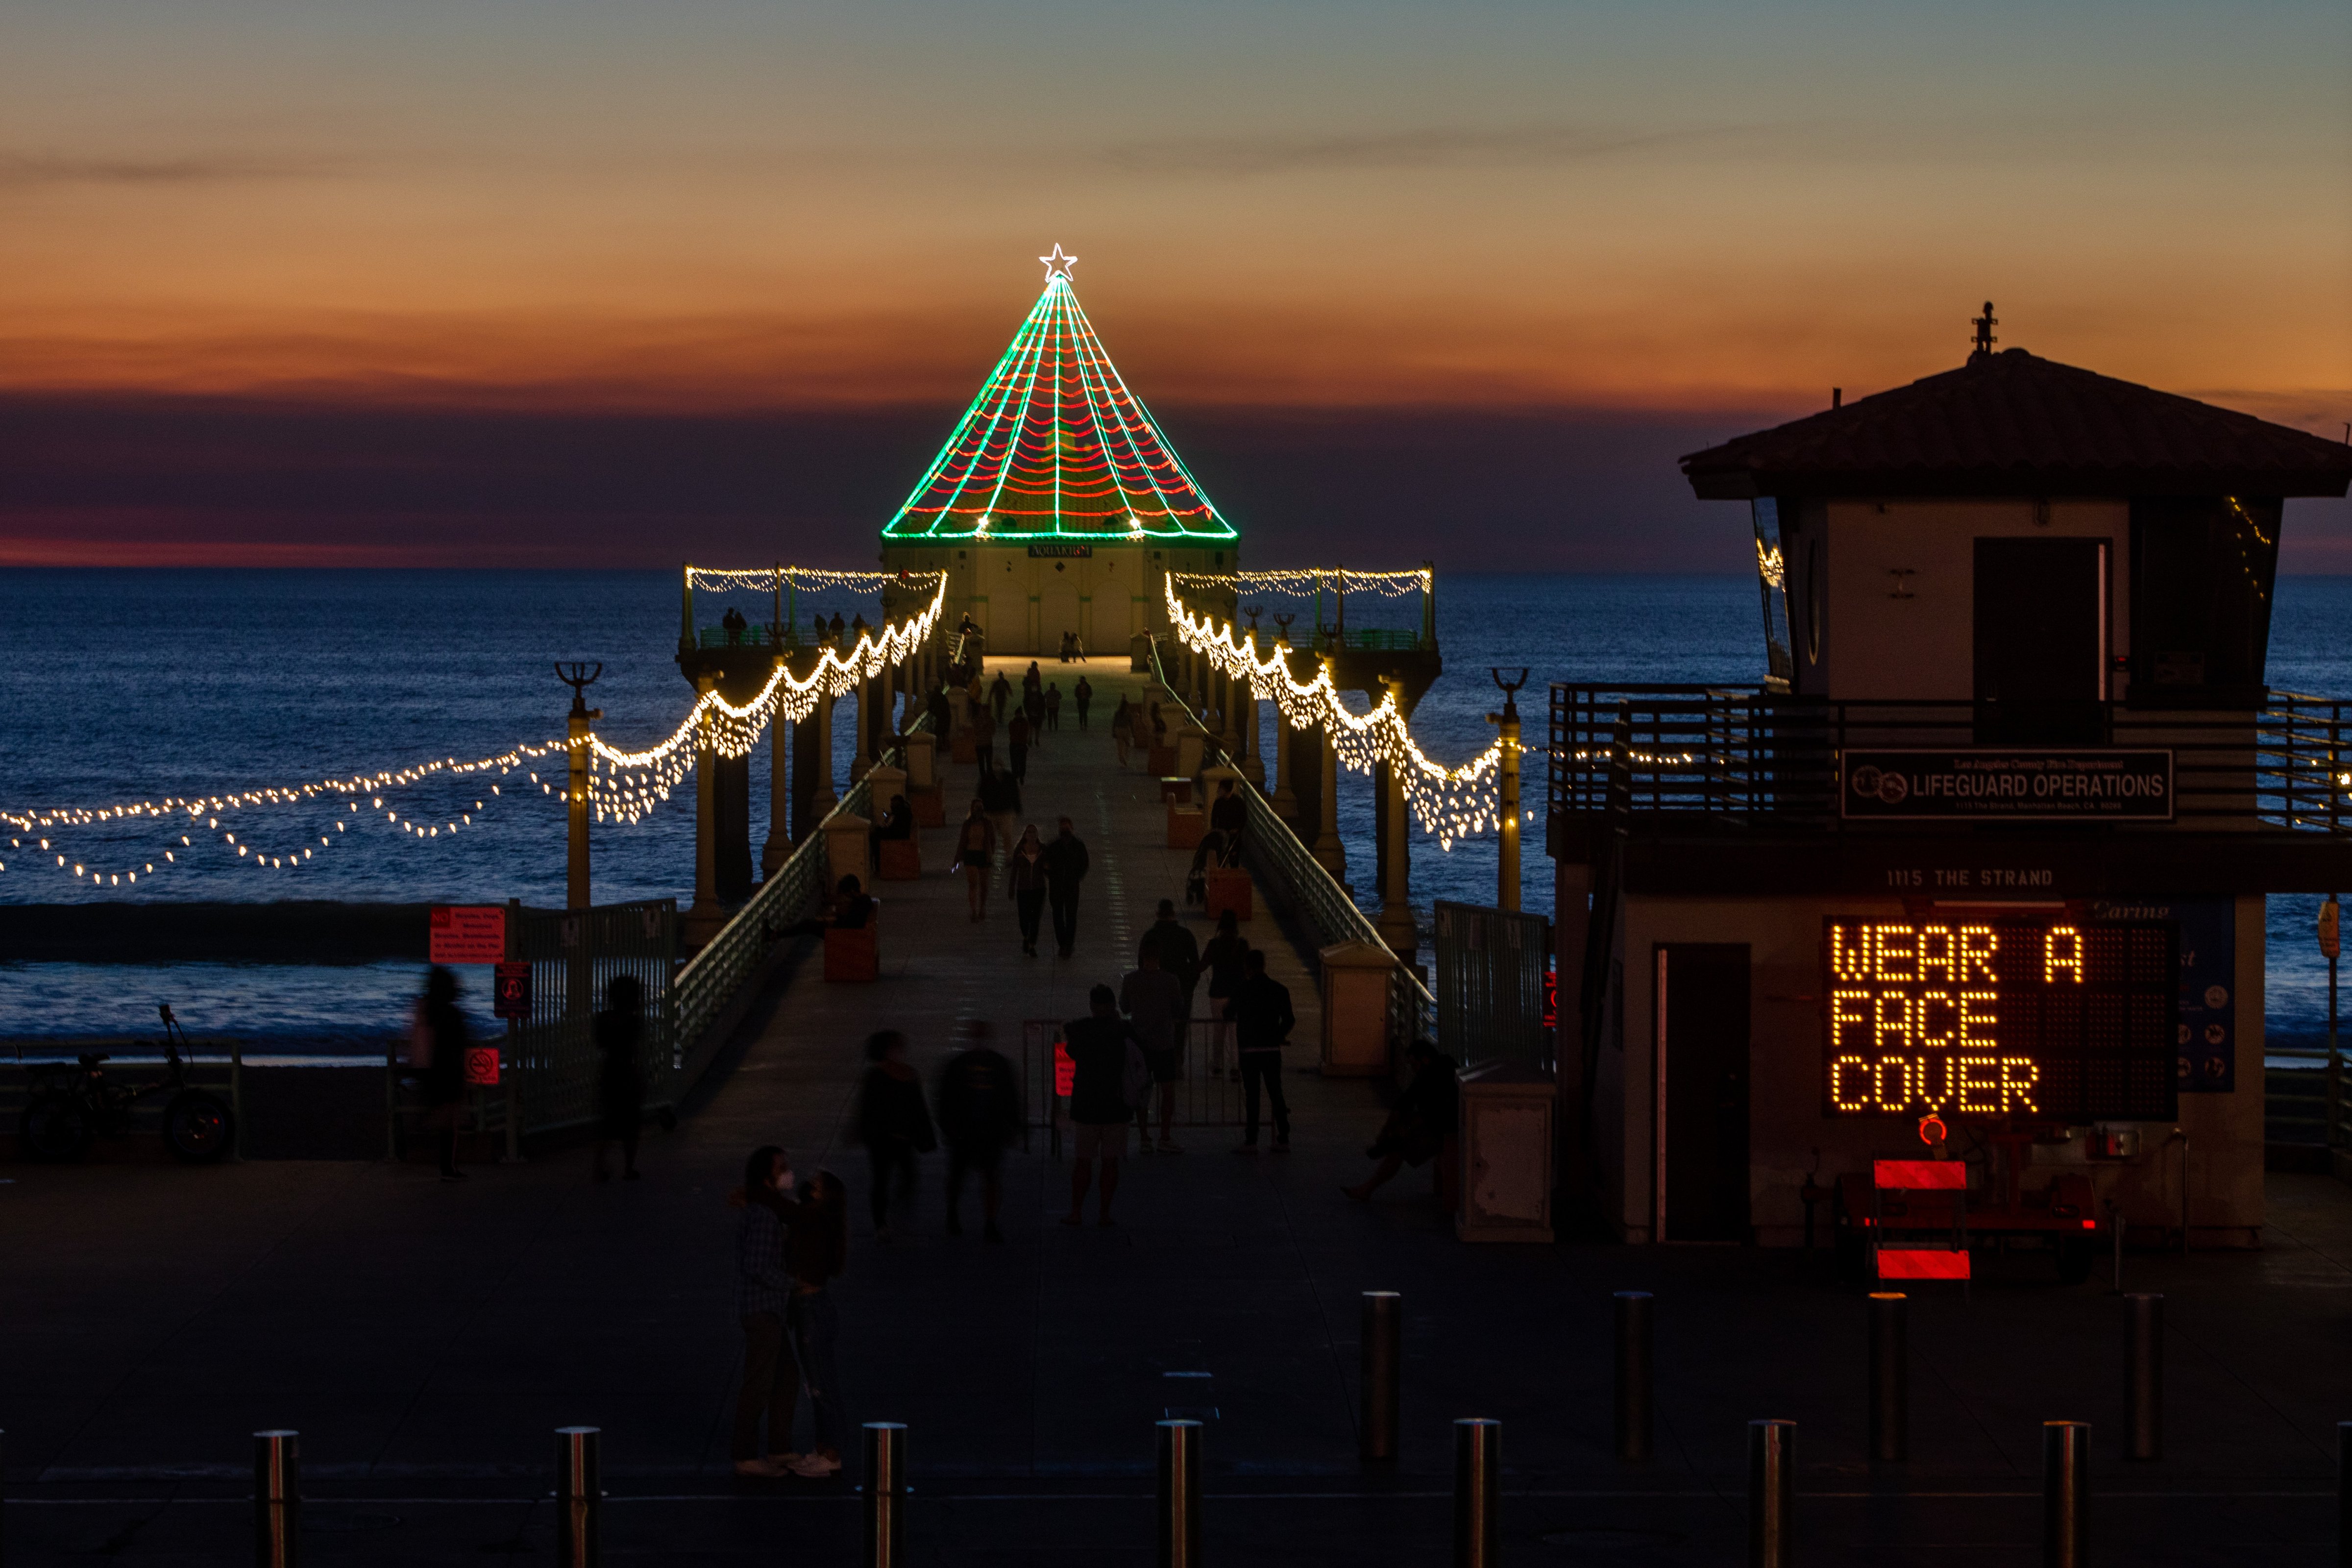 A sign tells visitors to the pier in Manhattan Beach, Calif., on Dec. 3, 2020 to wear a mask or face a $350 fine. (Jay Clendenin—Los Angeles Times/Getty Images)